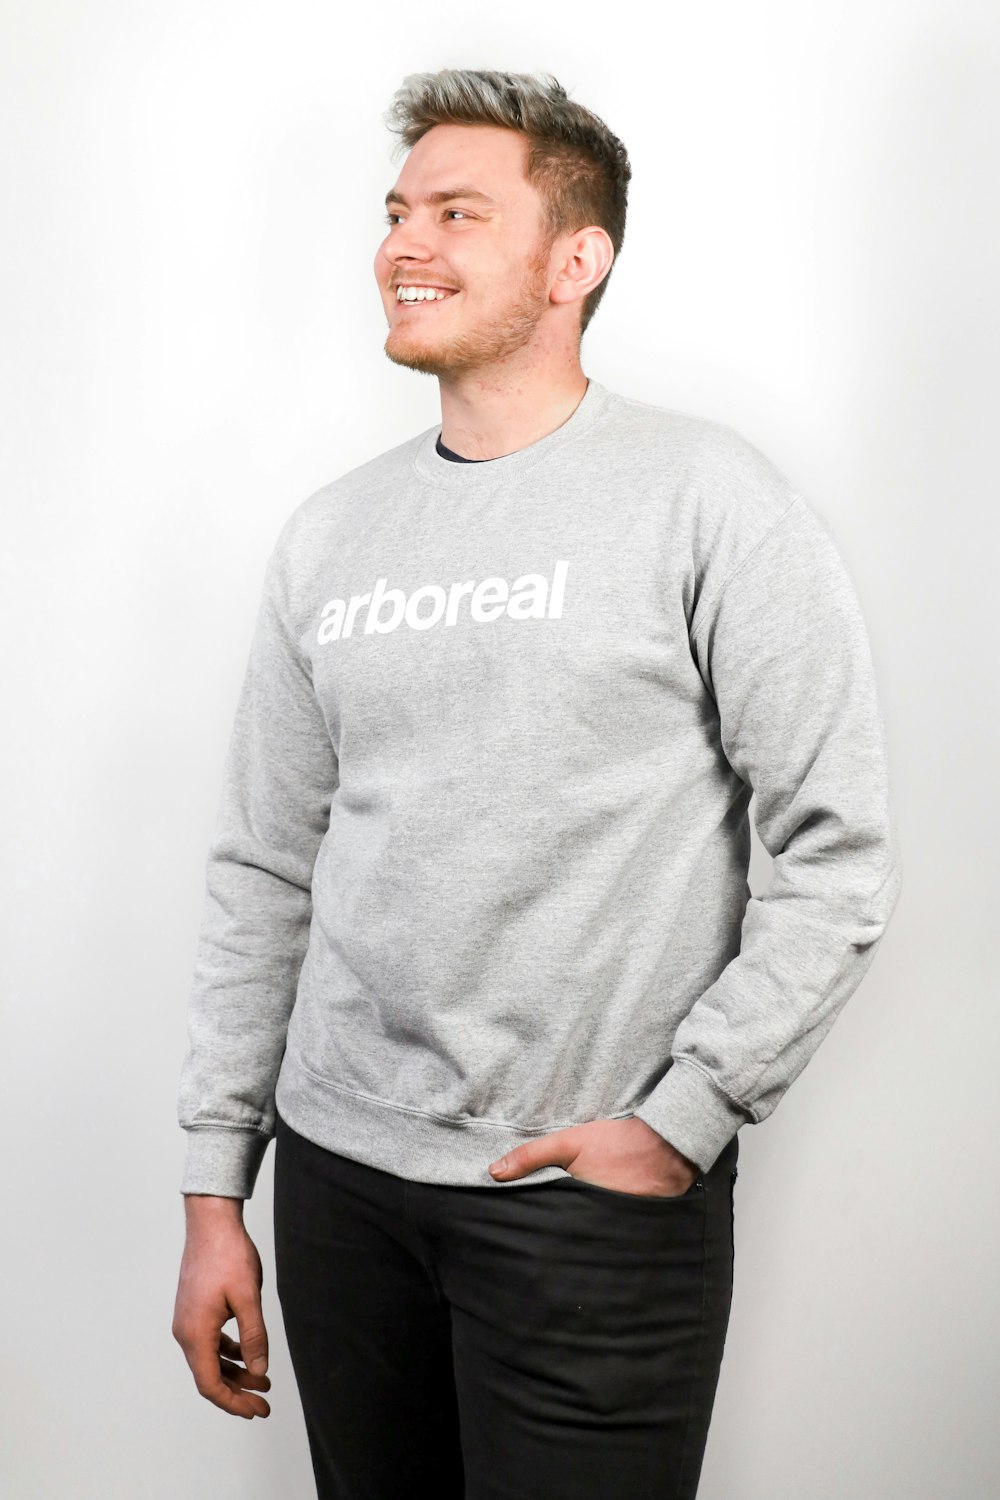 smiling man swearing gray sweater and black bottoms standing and looking his right side